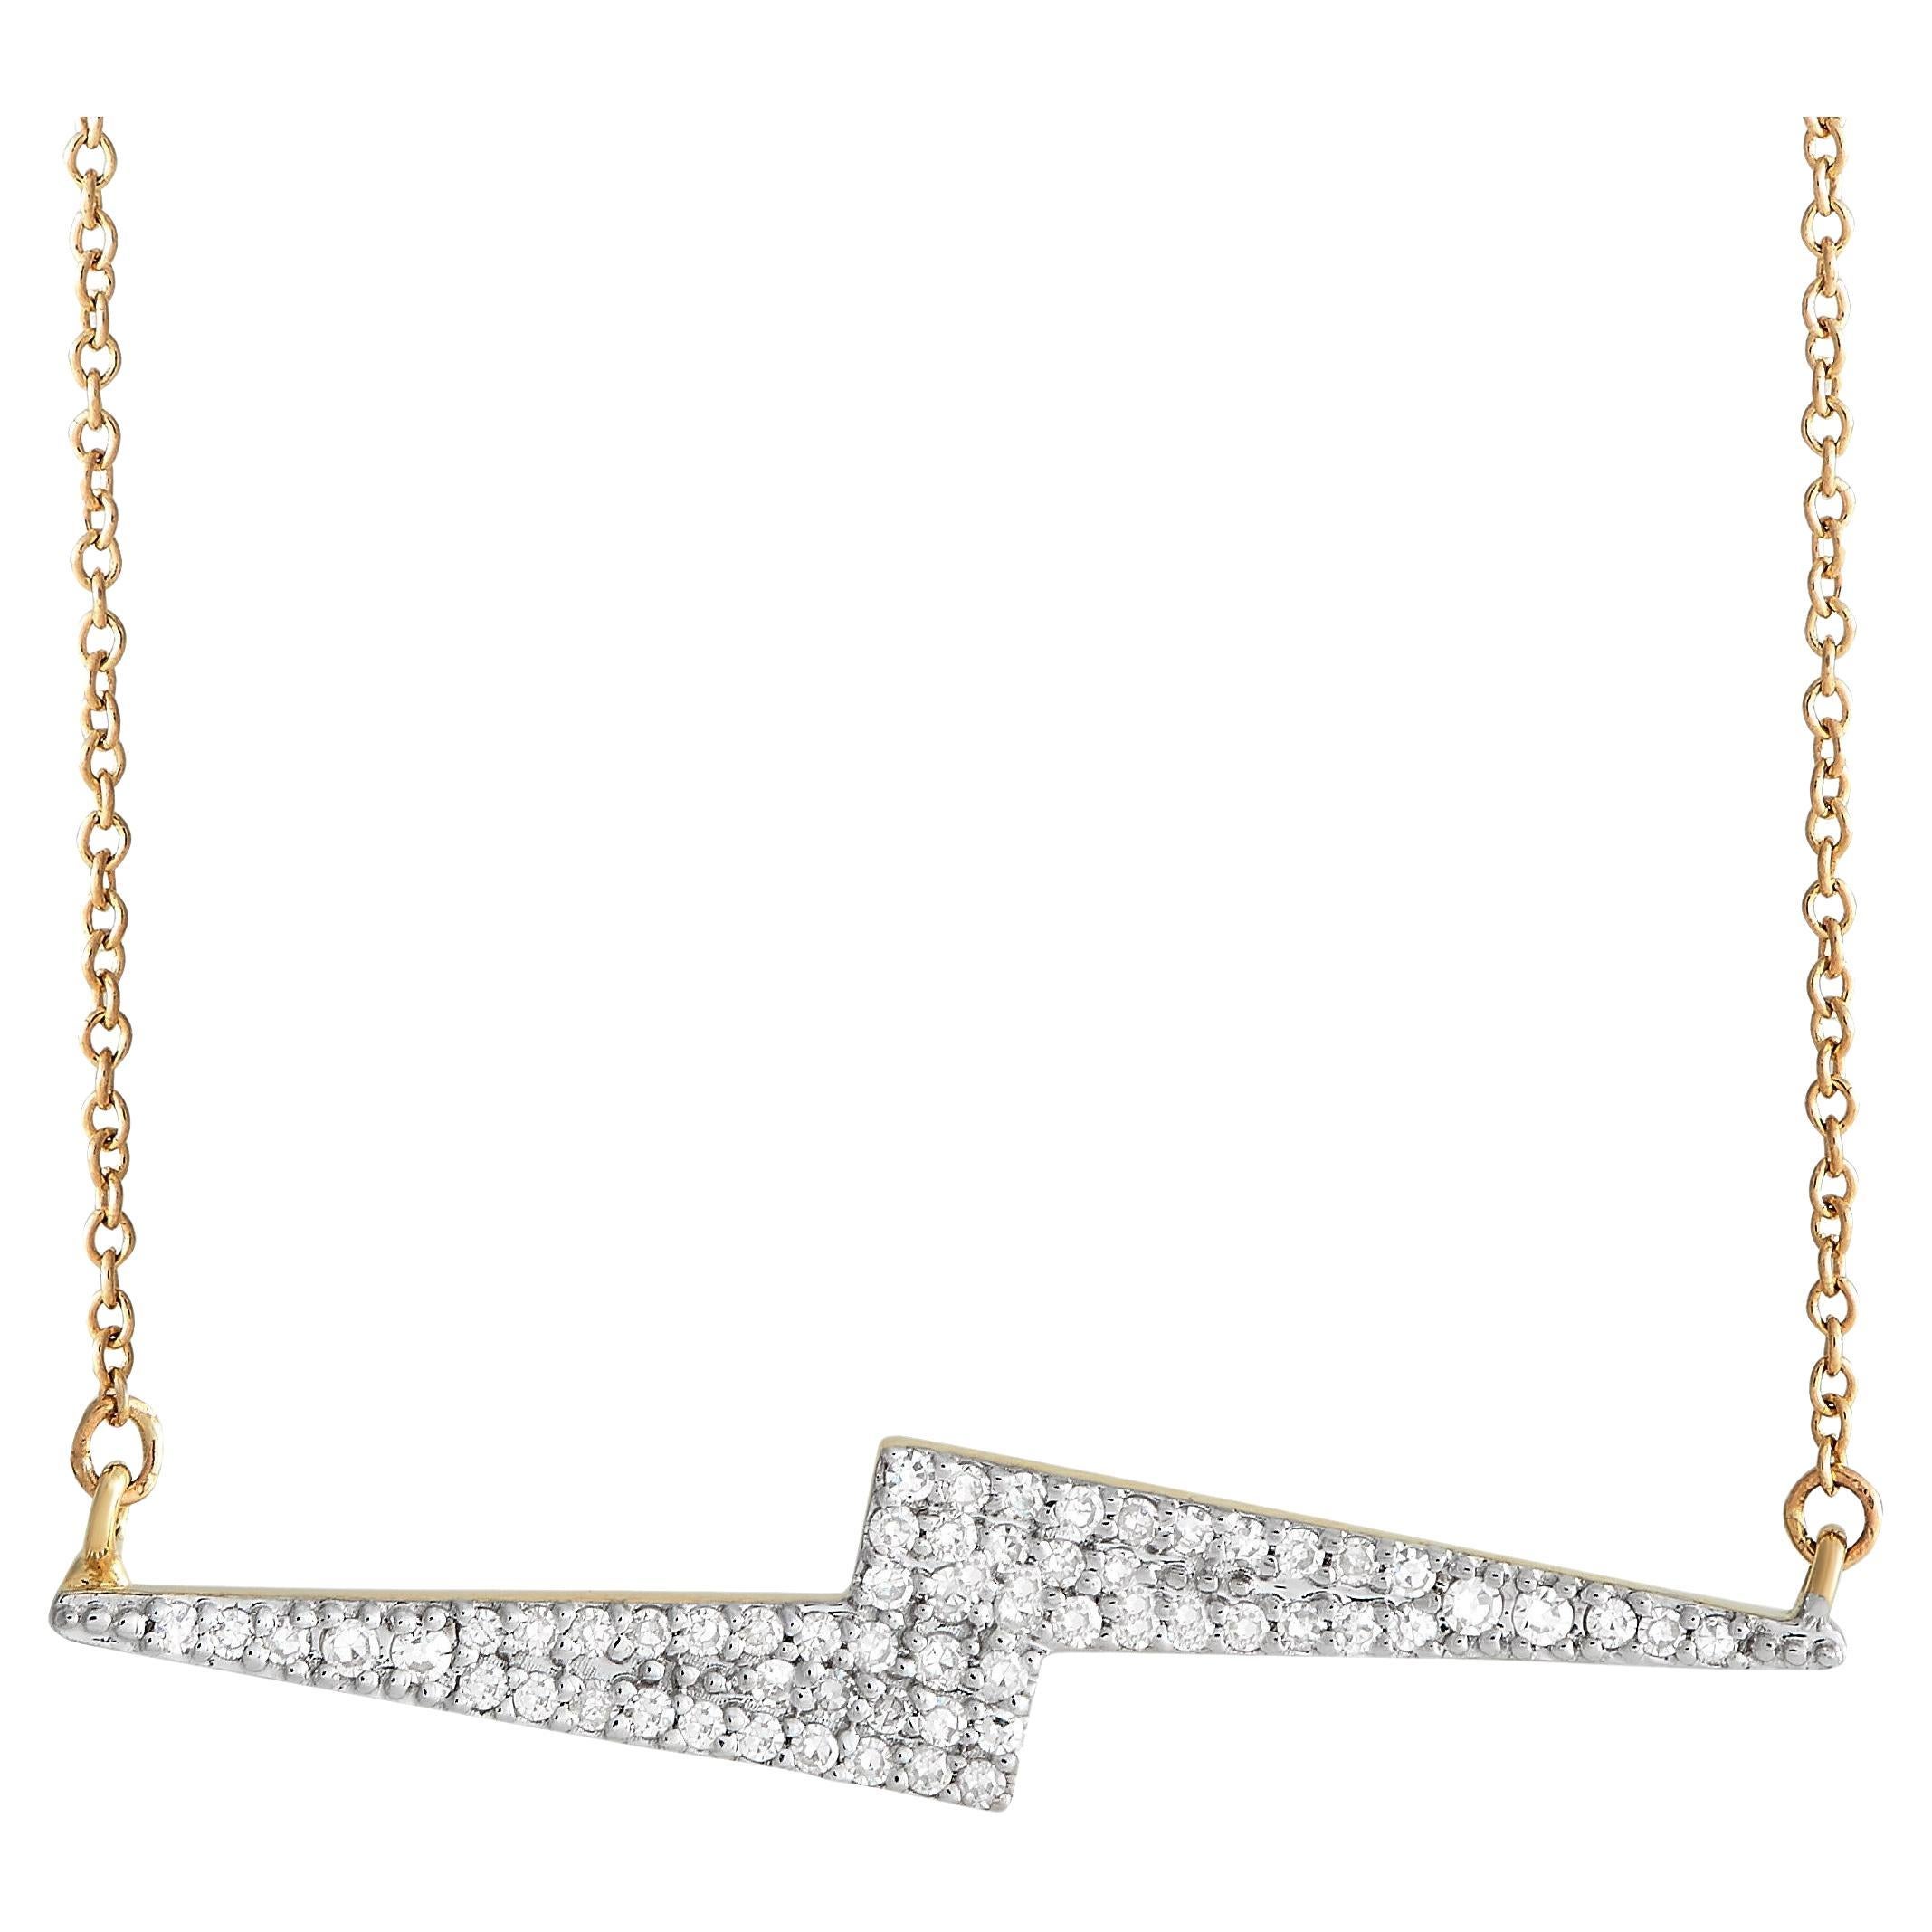 LB Exclusive 14K Yellow Gold 0.25ct Diamond Lightning Bolt Necklace